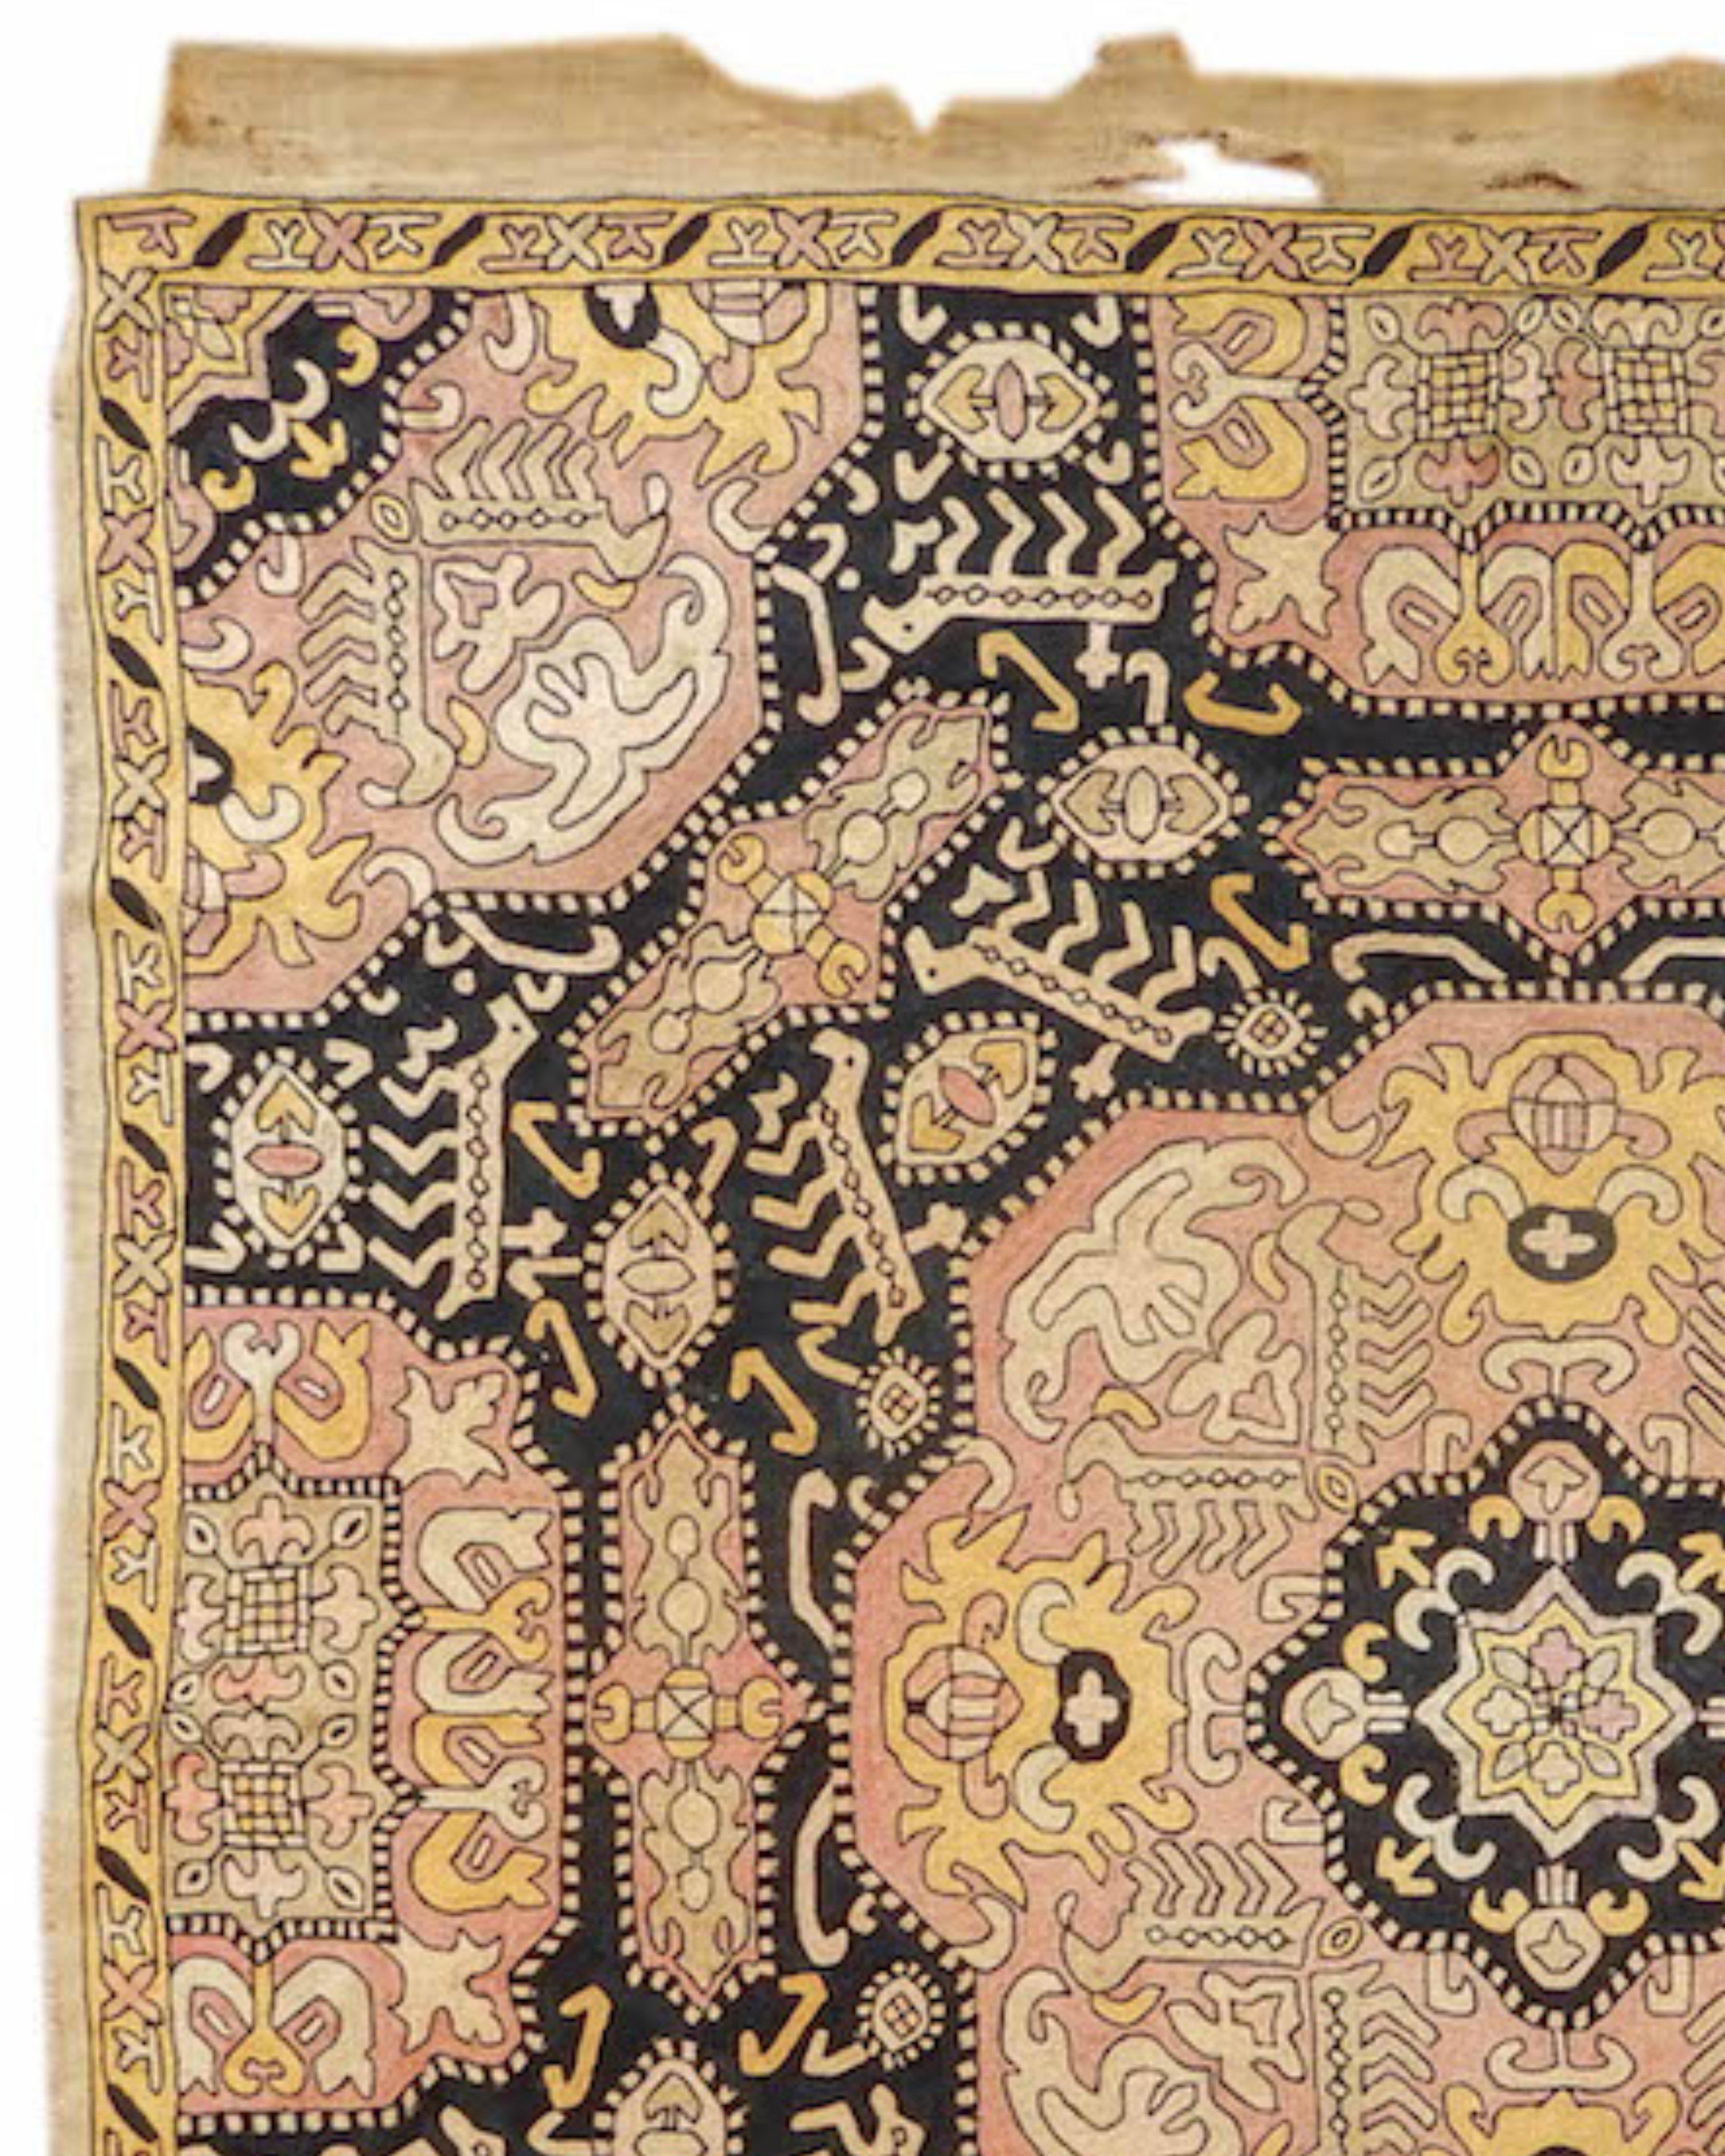 Hand-Knotted Caucasian Embroidery Rug, c. 1900 For Sale